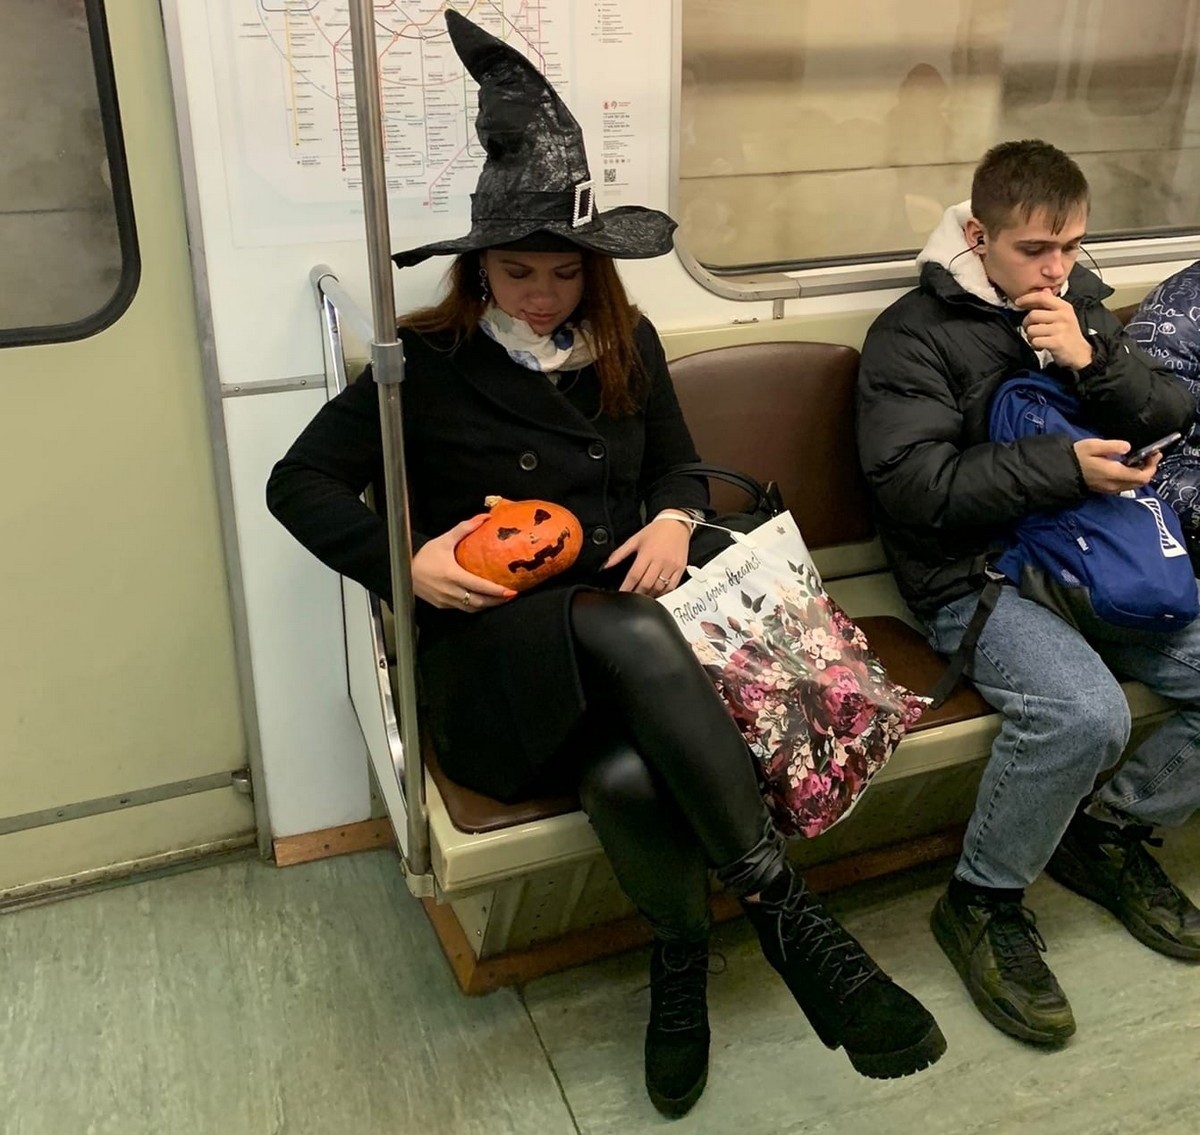 Unusual People In The Subway (22 pics)